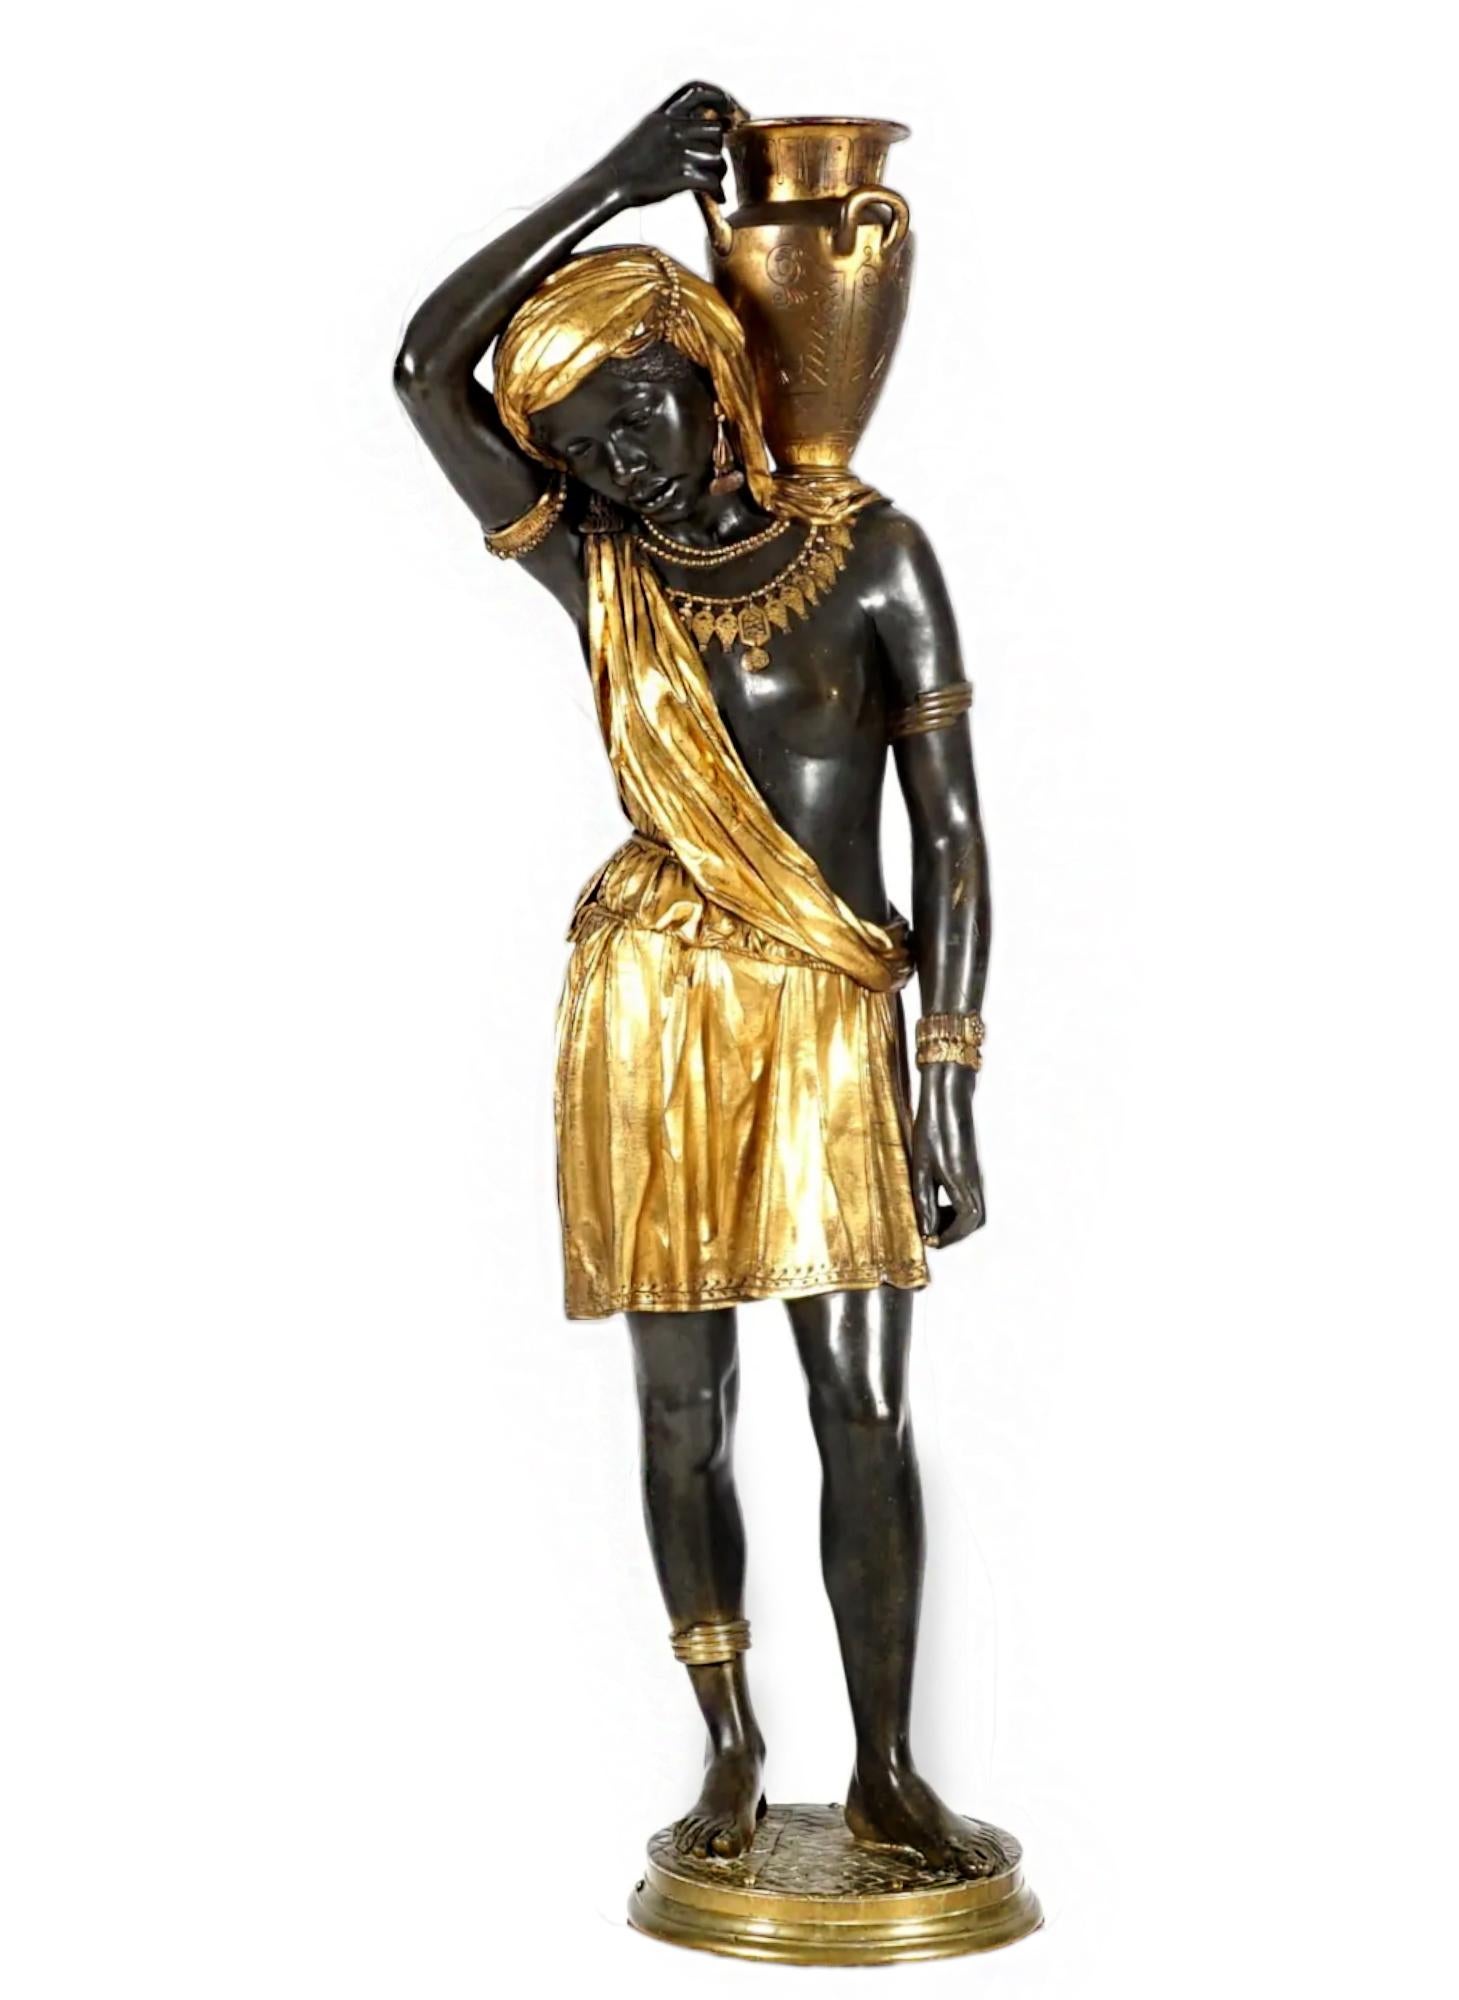 Nubian Water Carrier in Gilt & Patinated Bronze Attributed Graux-Marly Foundry